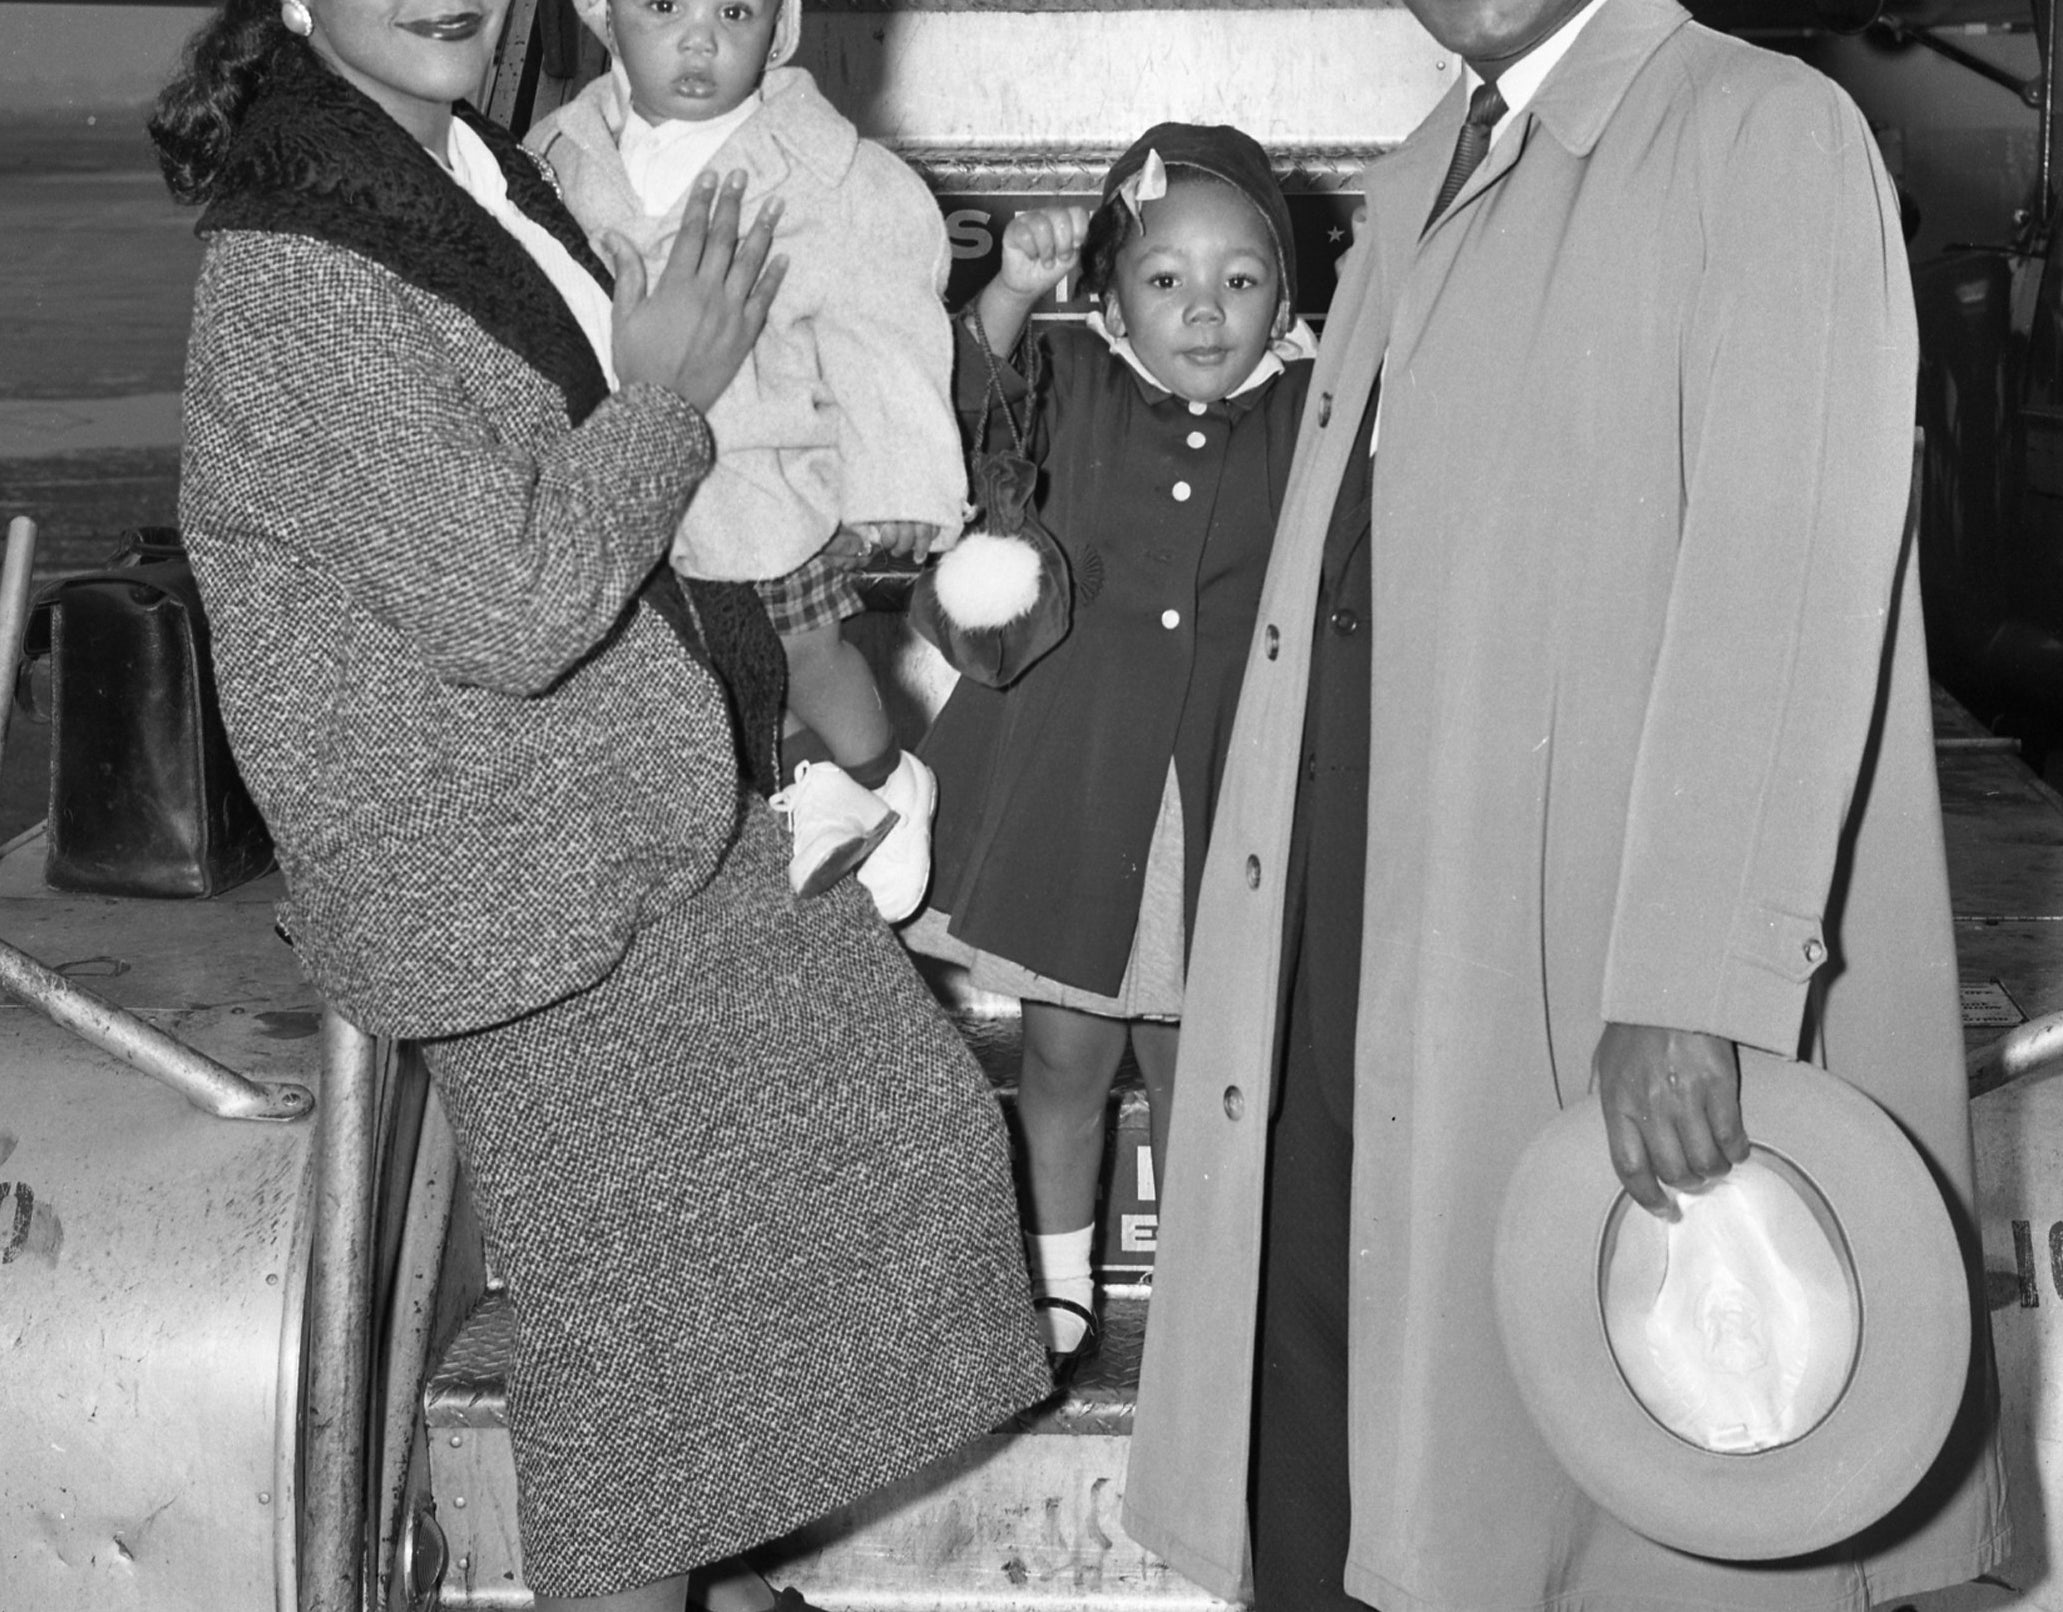 Martin poses with Coretta and two of their children